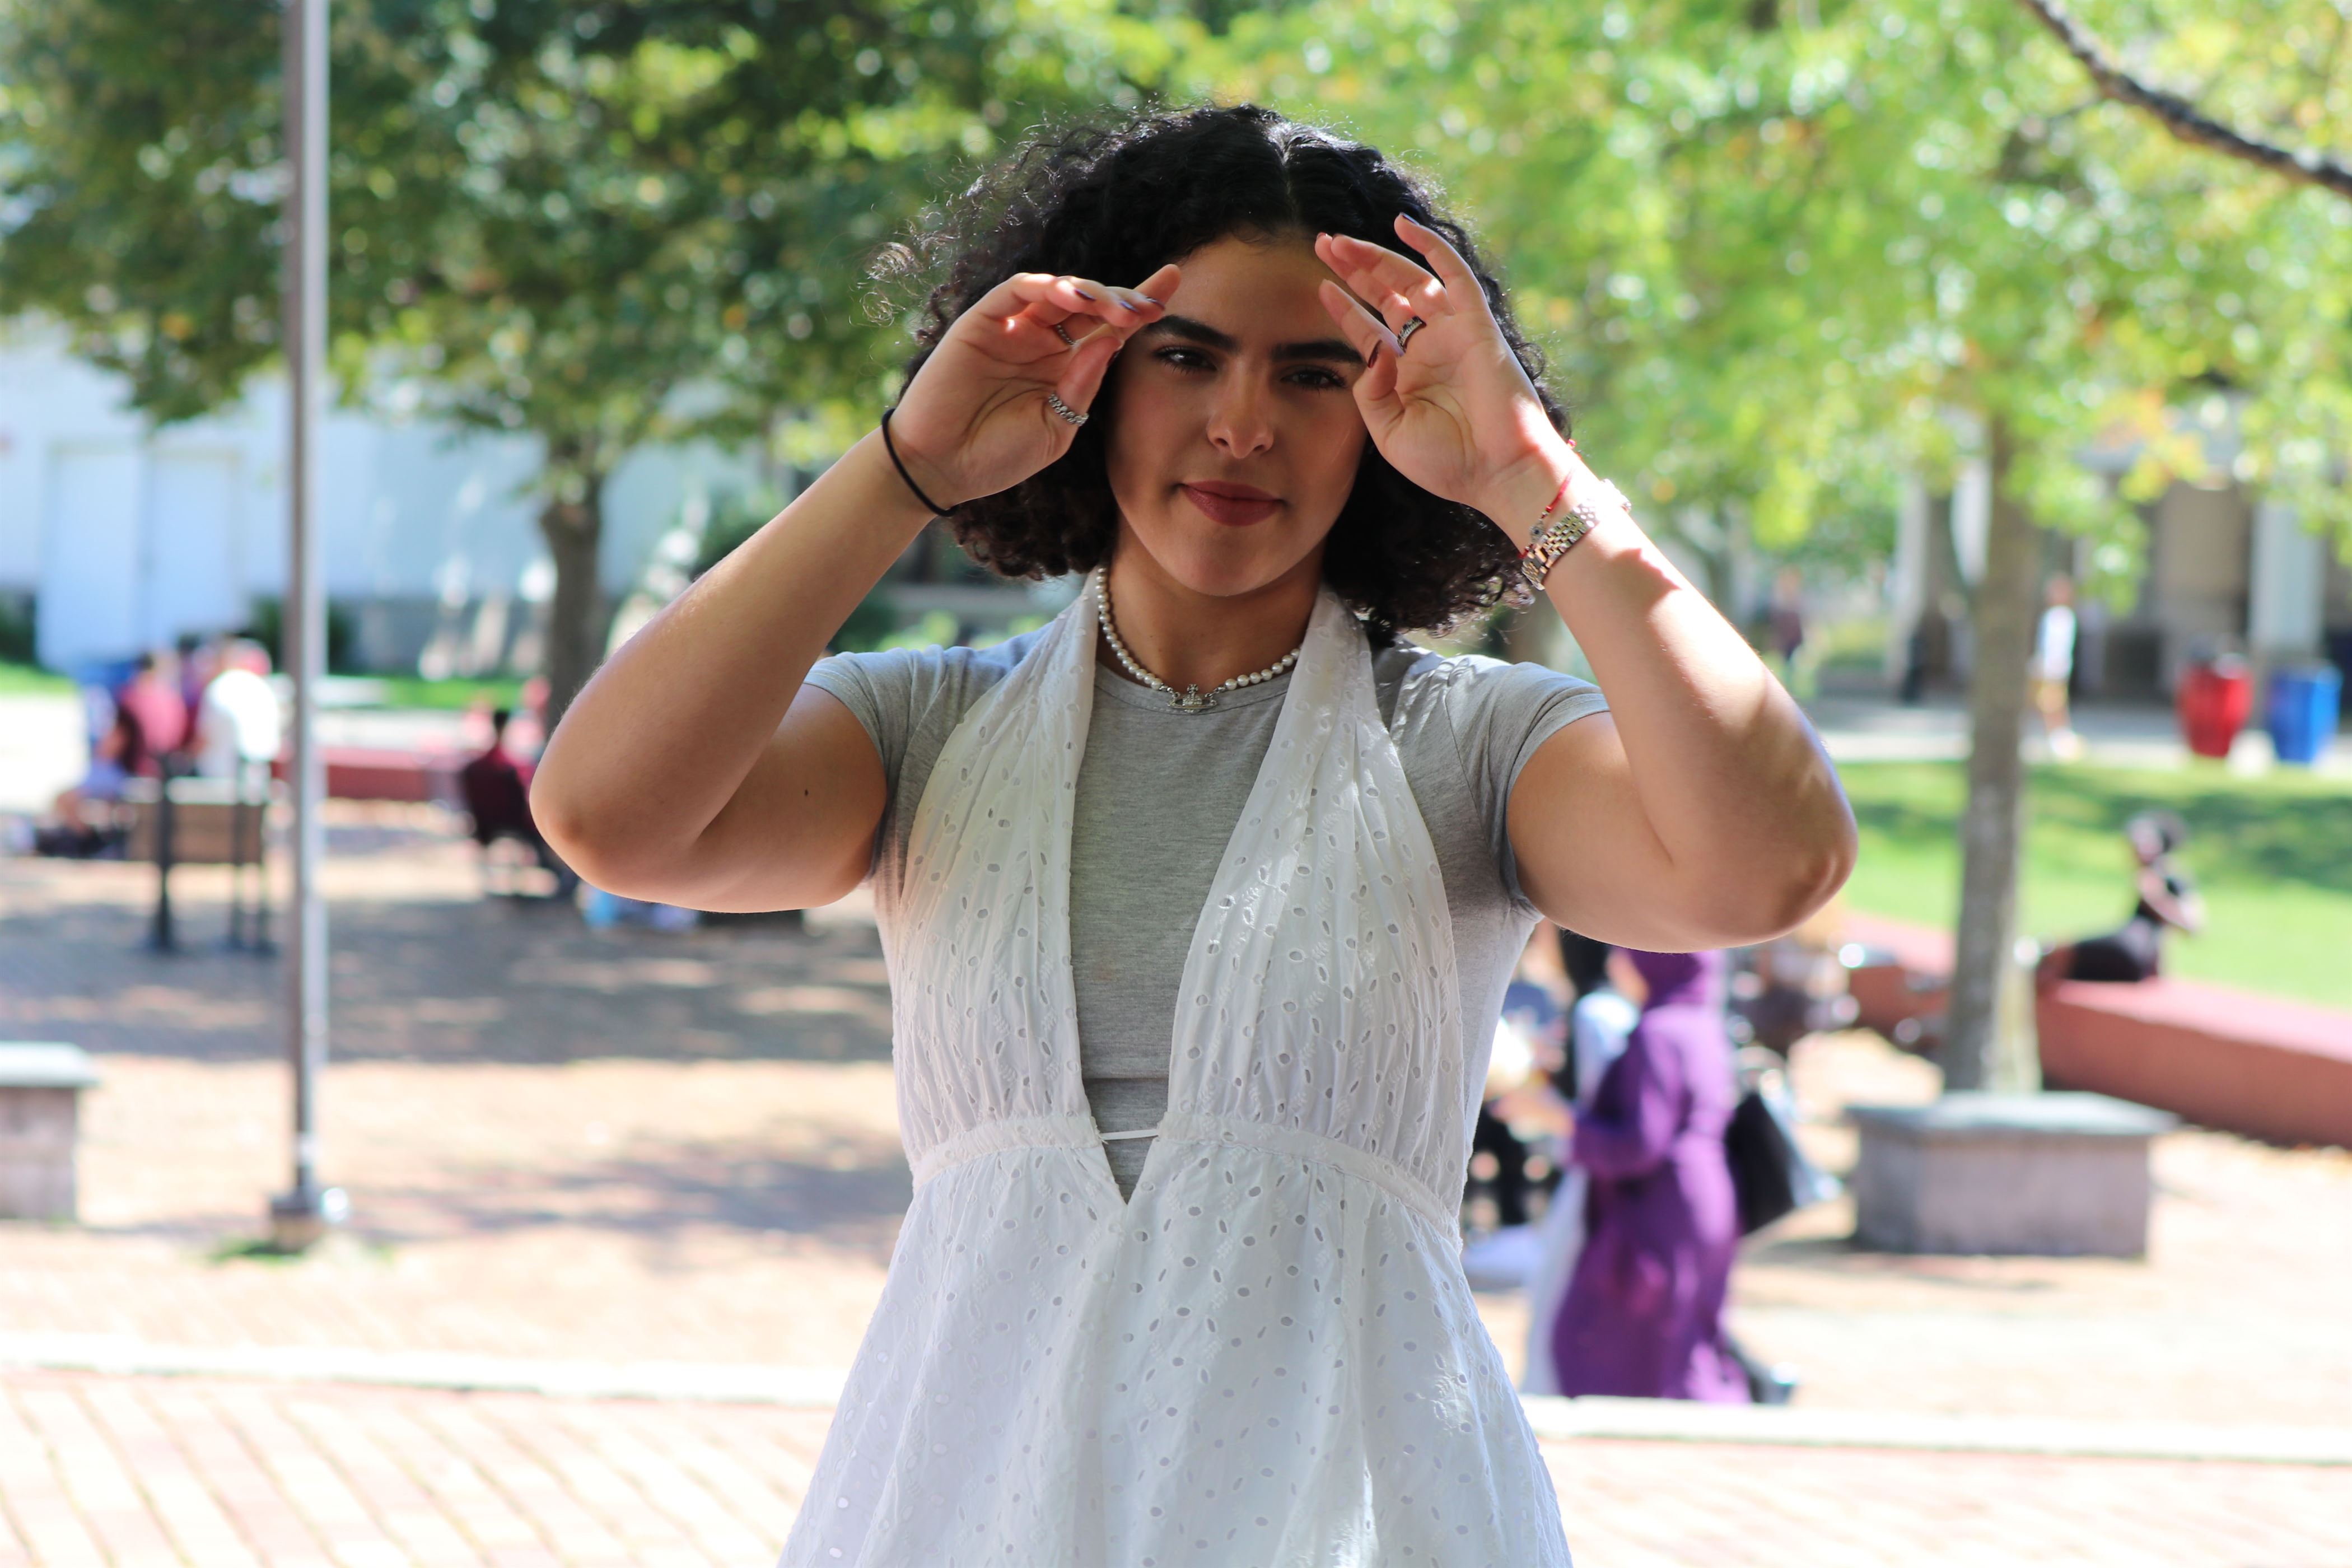 Isabellla Alvarez, a student at Montclair State Univeristy, poses for a photo.
Photo courtesy of Tala Abu Kamal